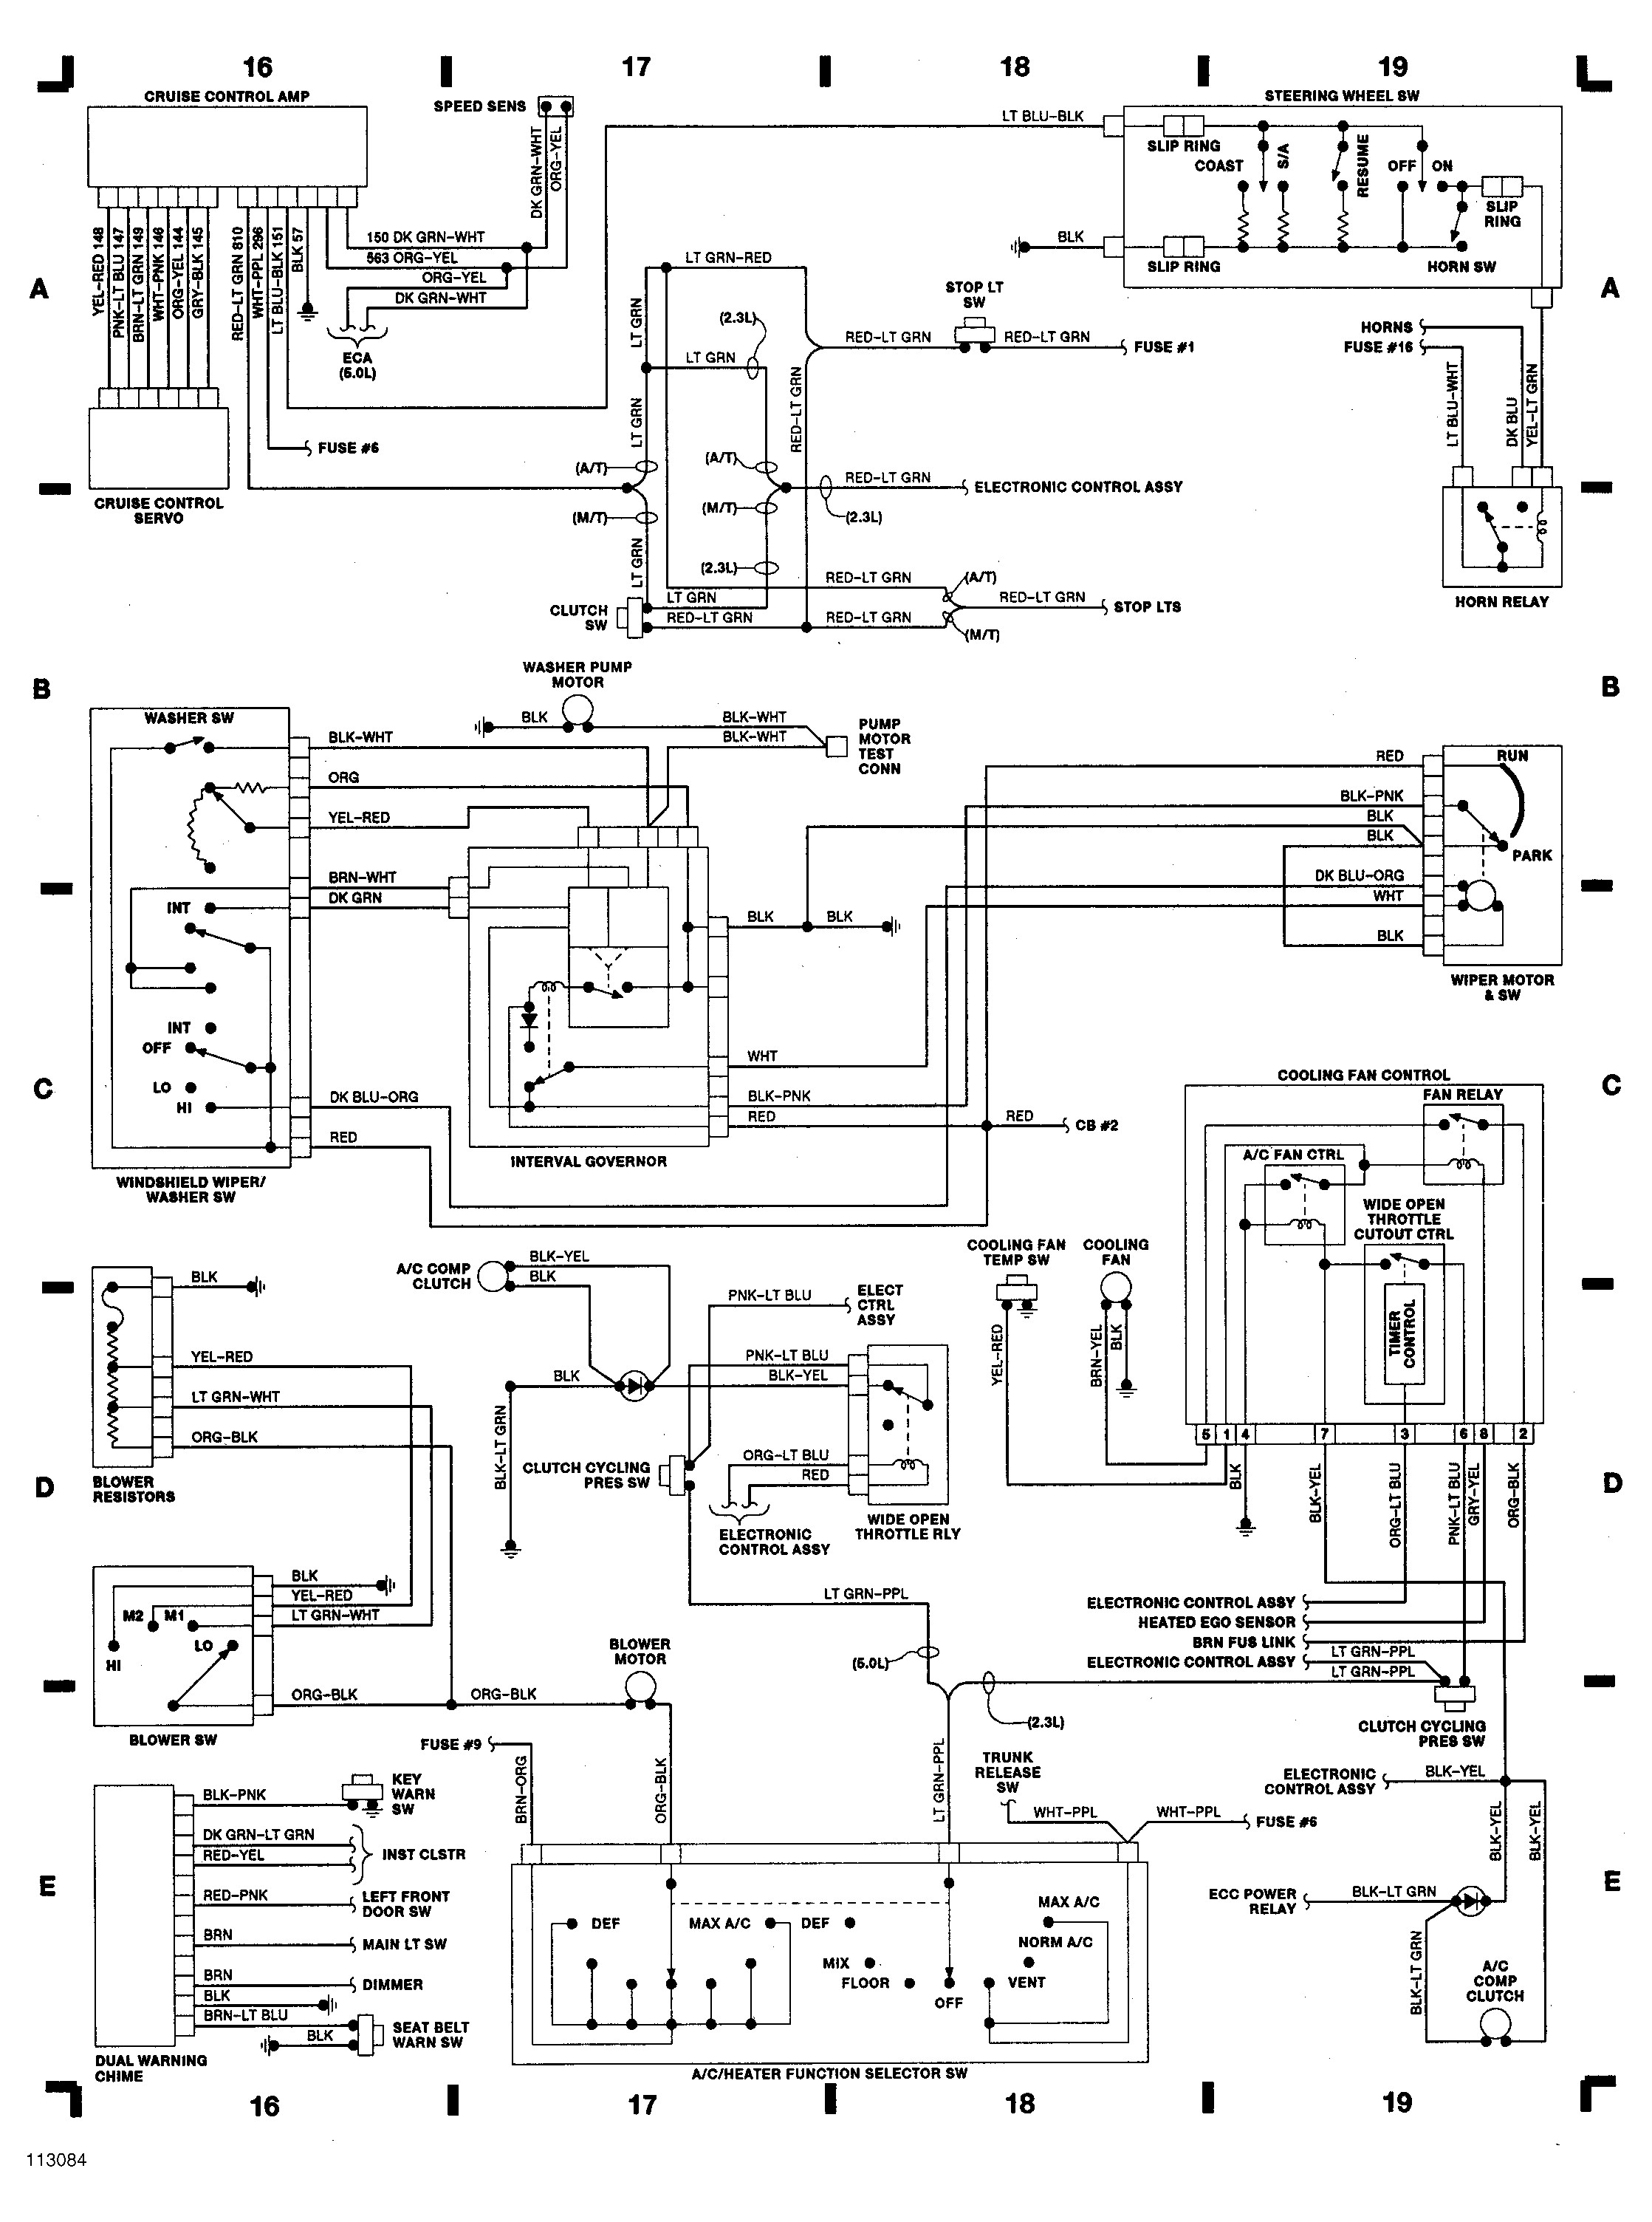 2002 ford Mustang Engine Diagram ford Mustang Wiring Diagrams Further 1995 ford Mustang Wiring Of 2002 ford Mustang Engine Diagram